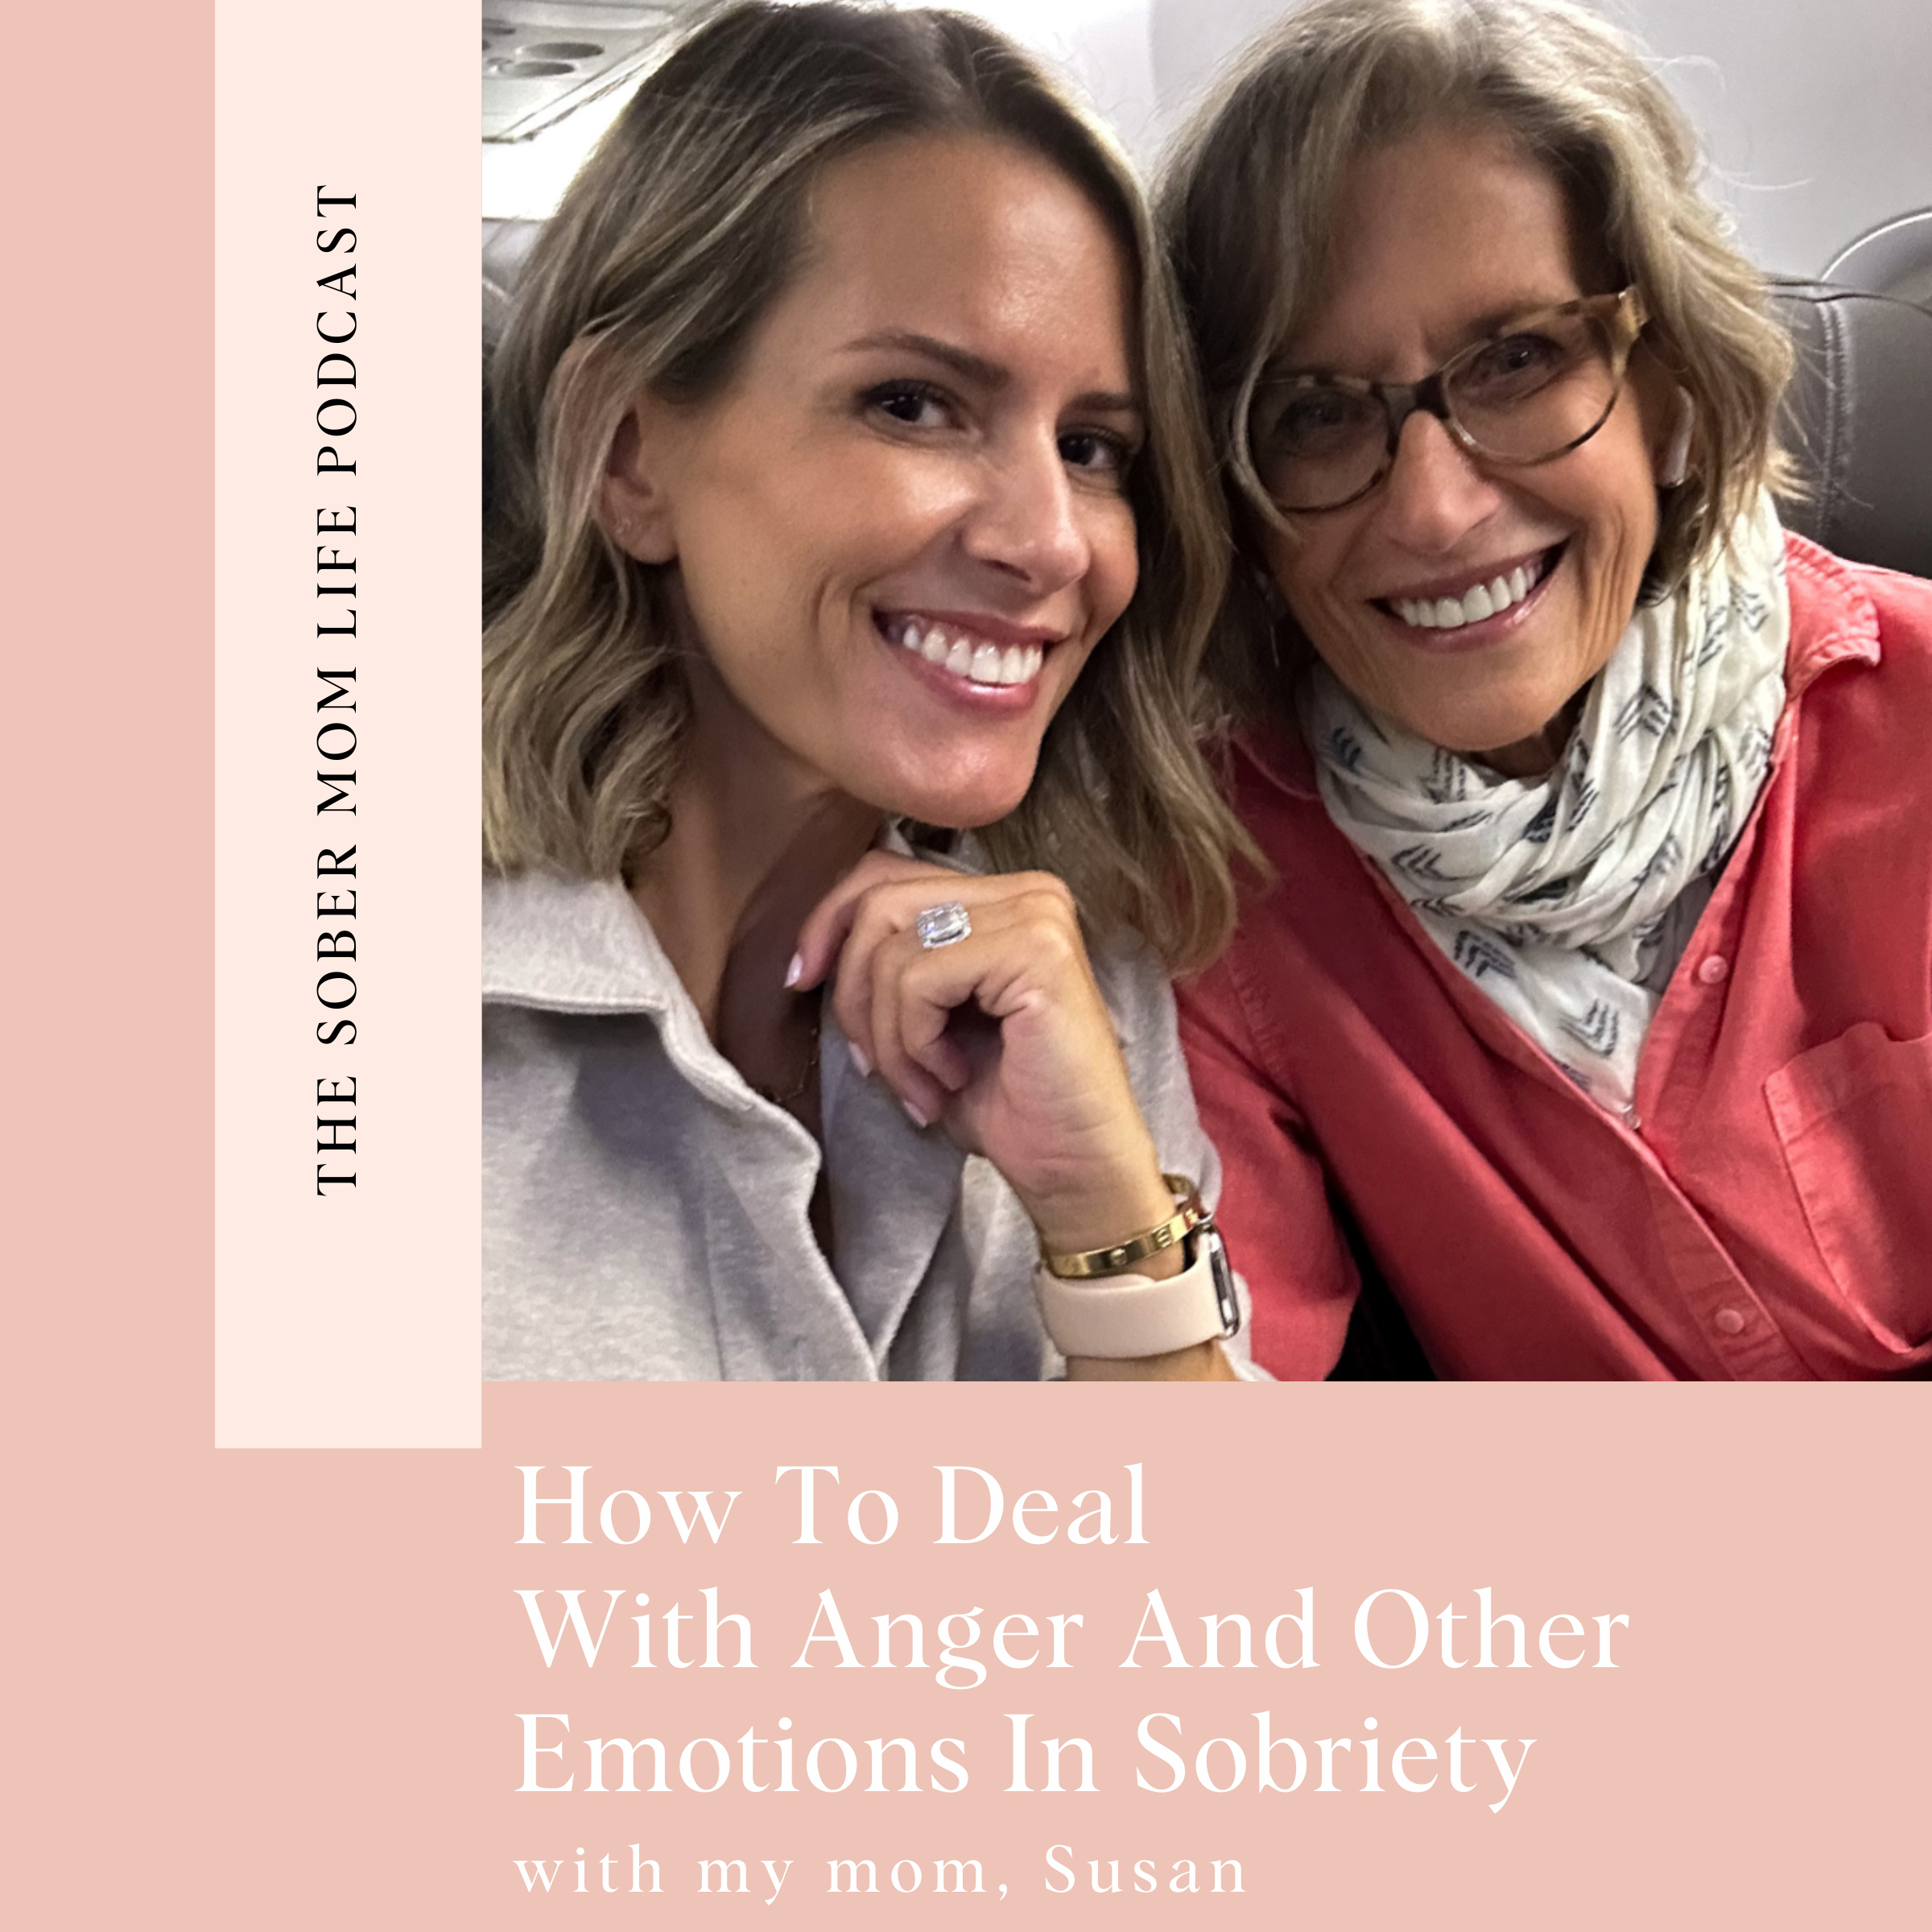 How to Deal With Anger and Other Emotions in Sobriety with my mom, Susan